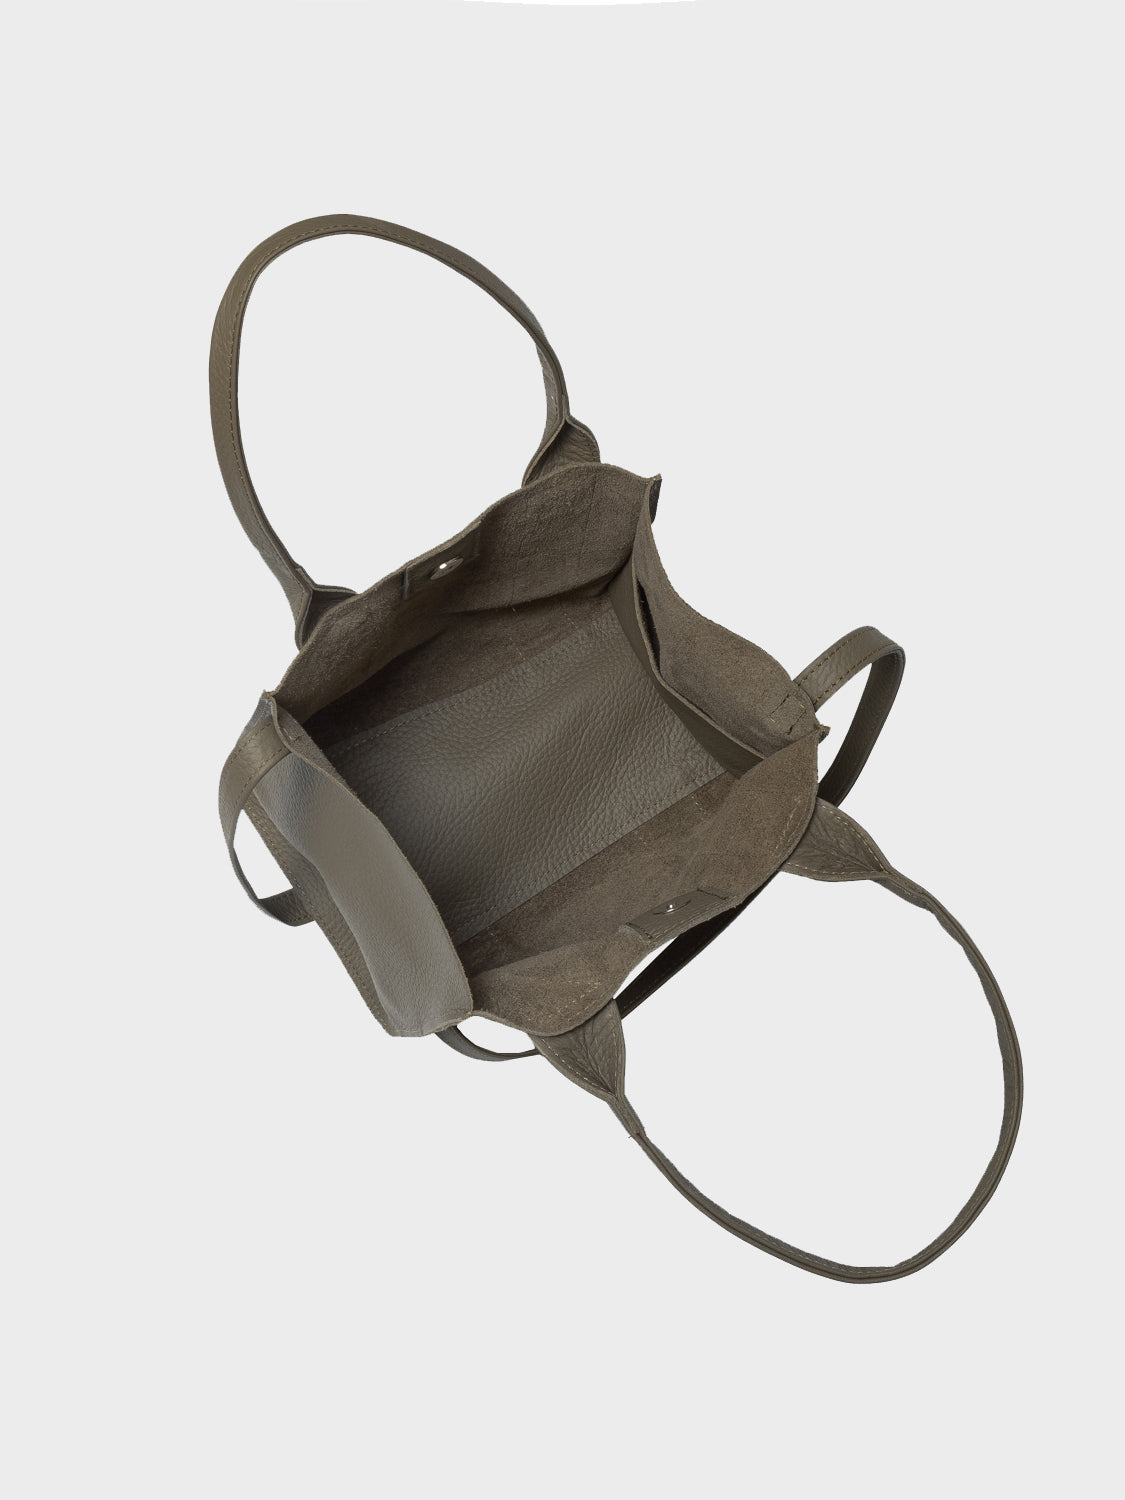 THE SMALL BAG TAUPE LECOLLET